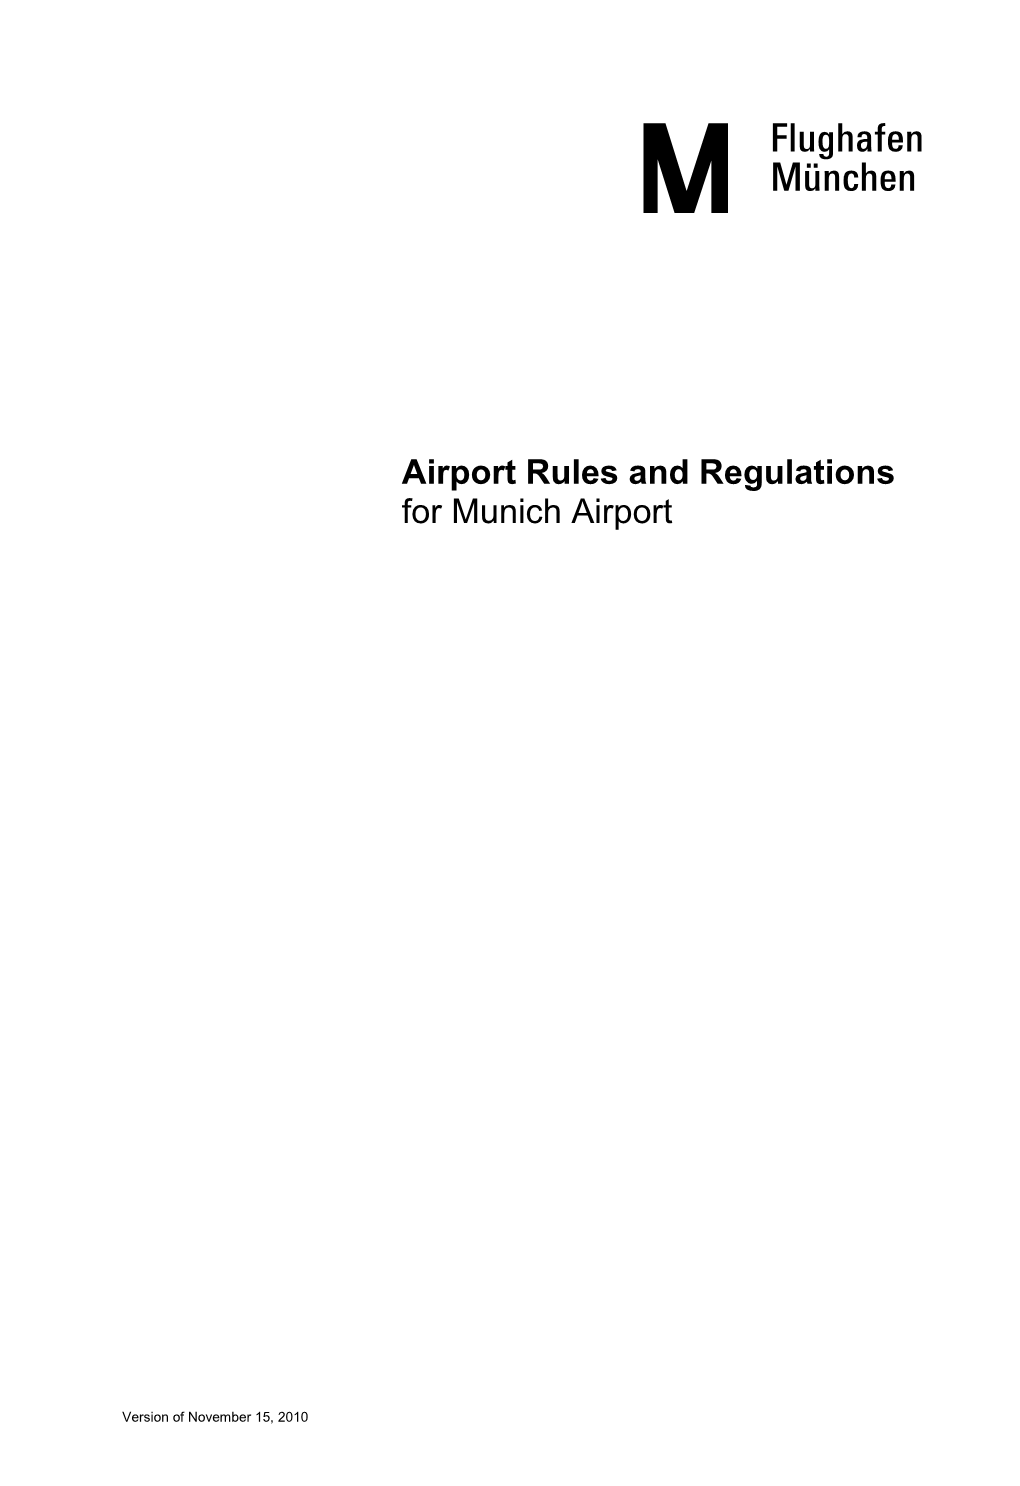 Airport Rules and Regulations for Munich Airport